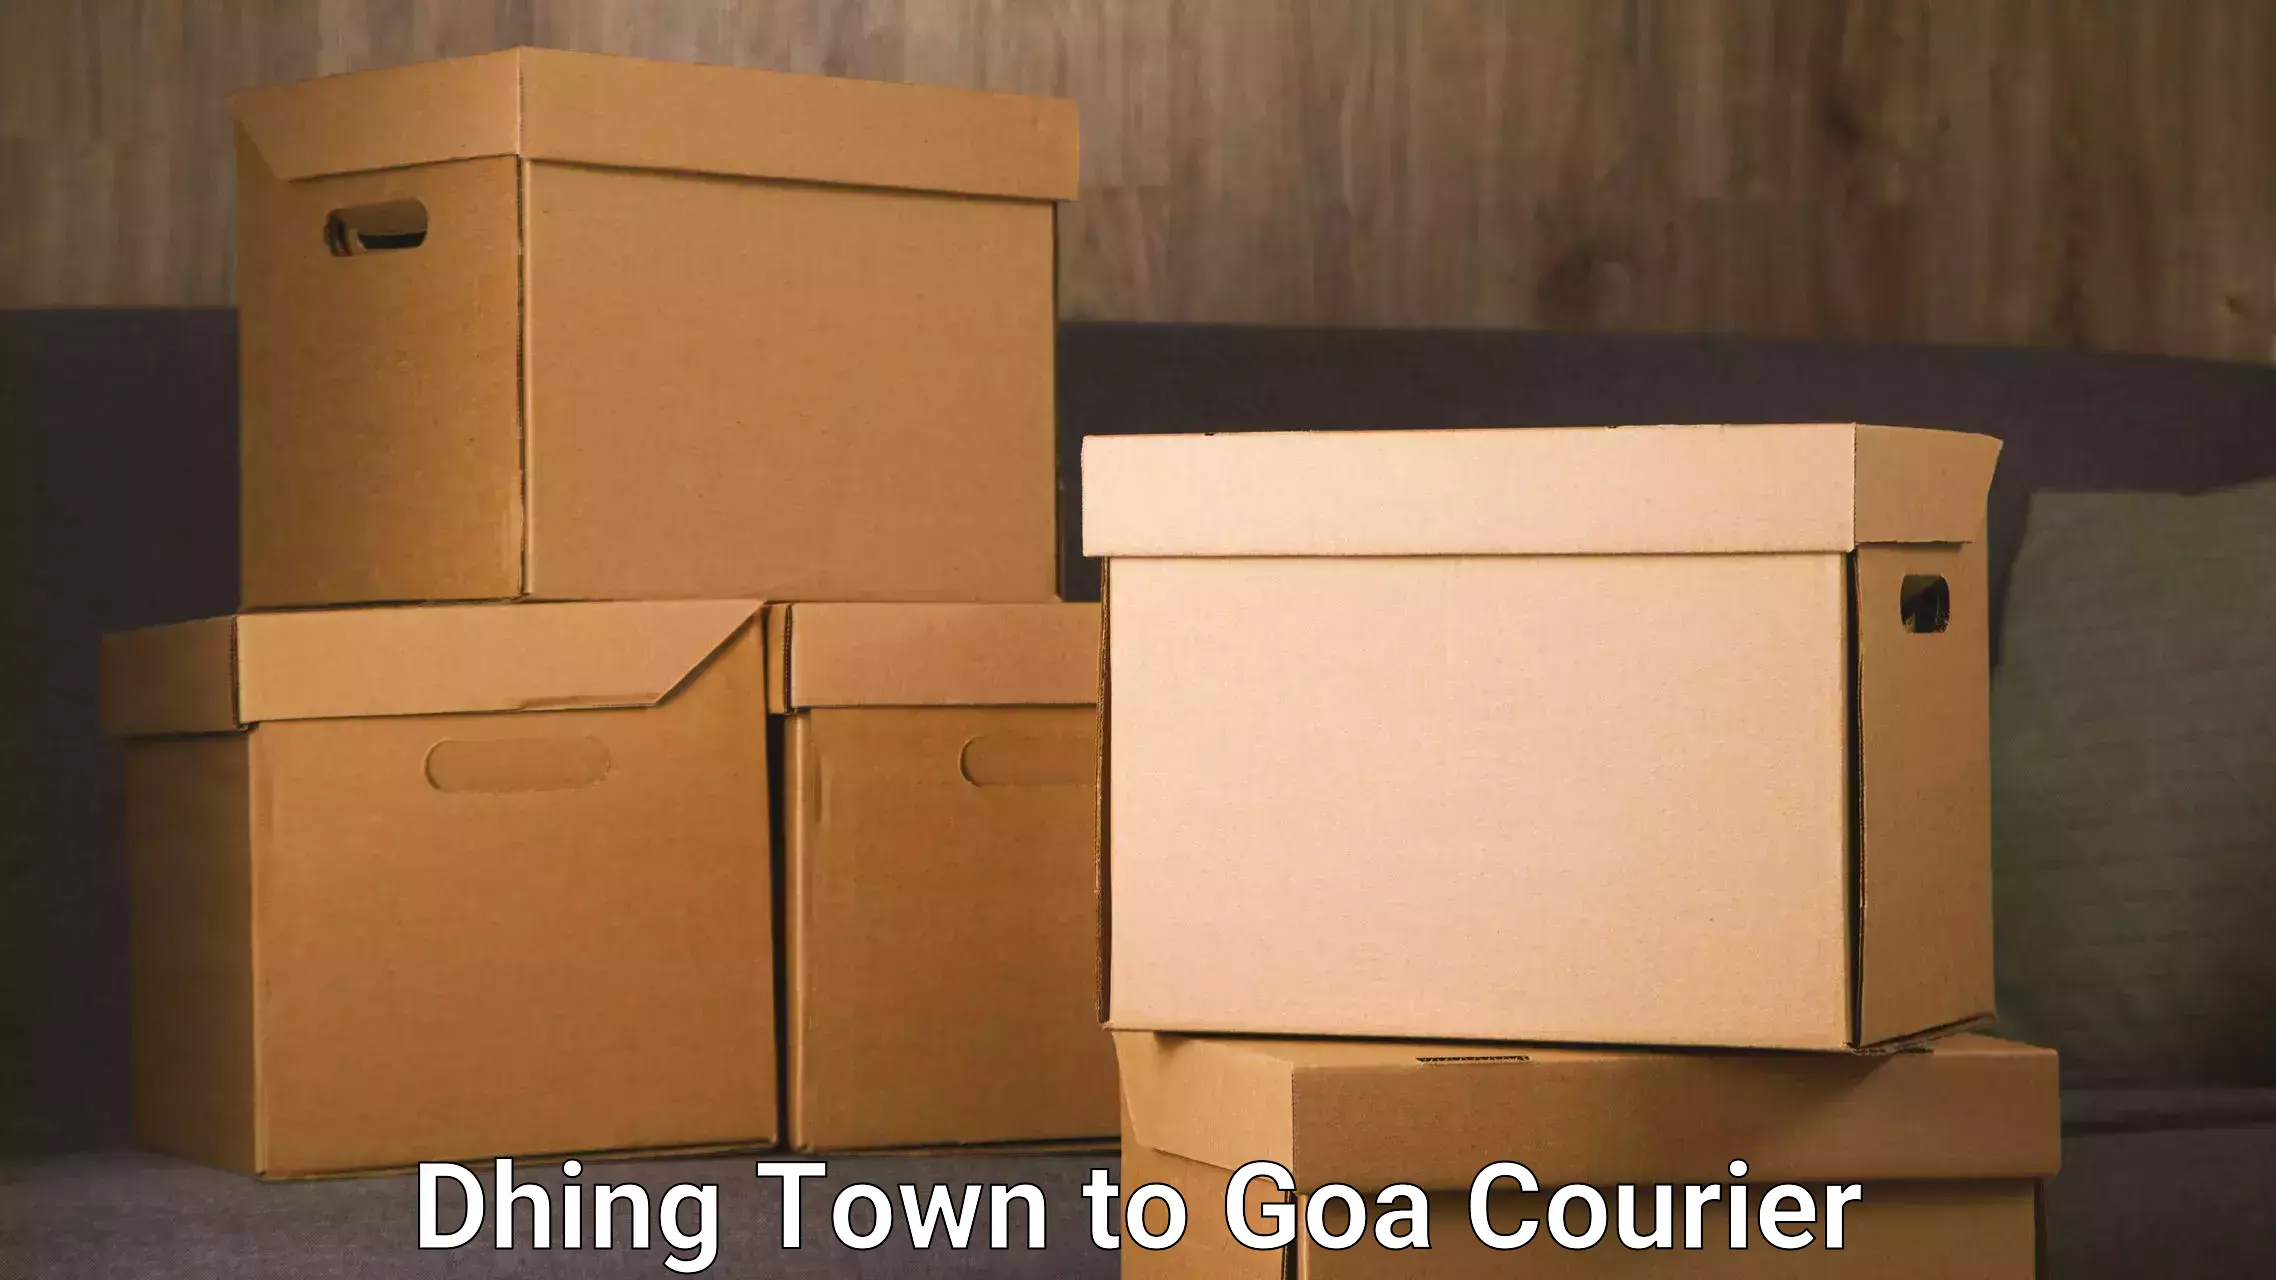 Modern courier technology Dhing Town to Mormugao Port